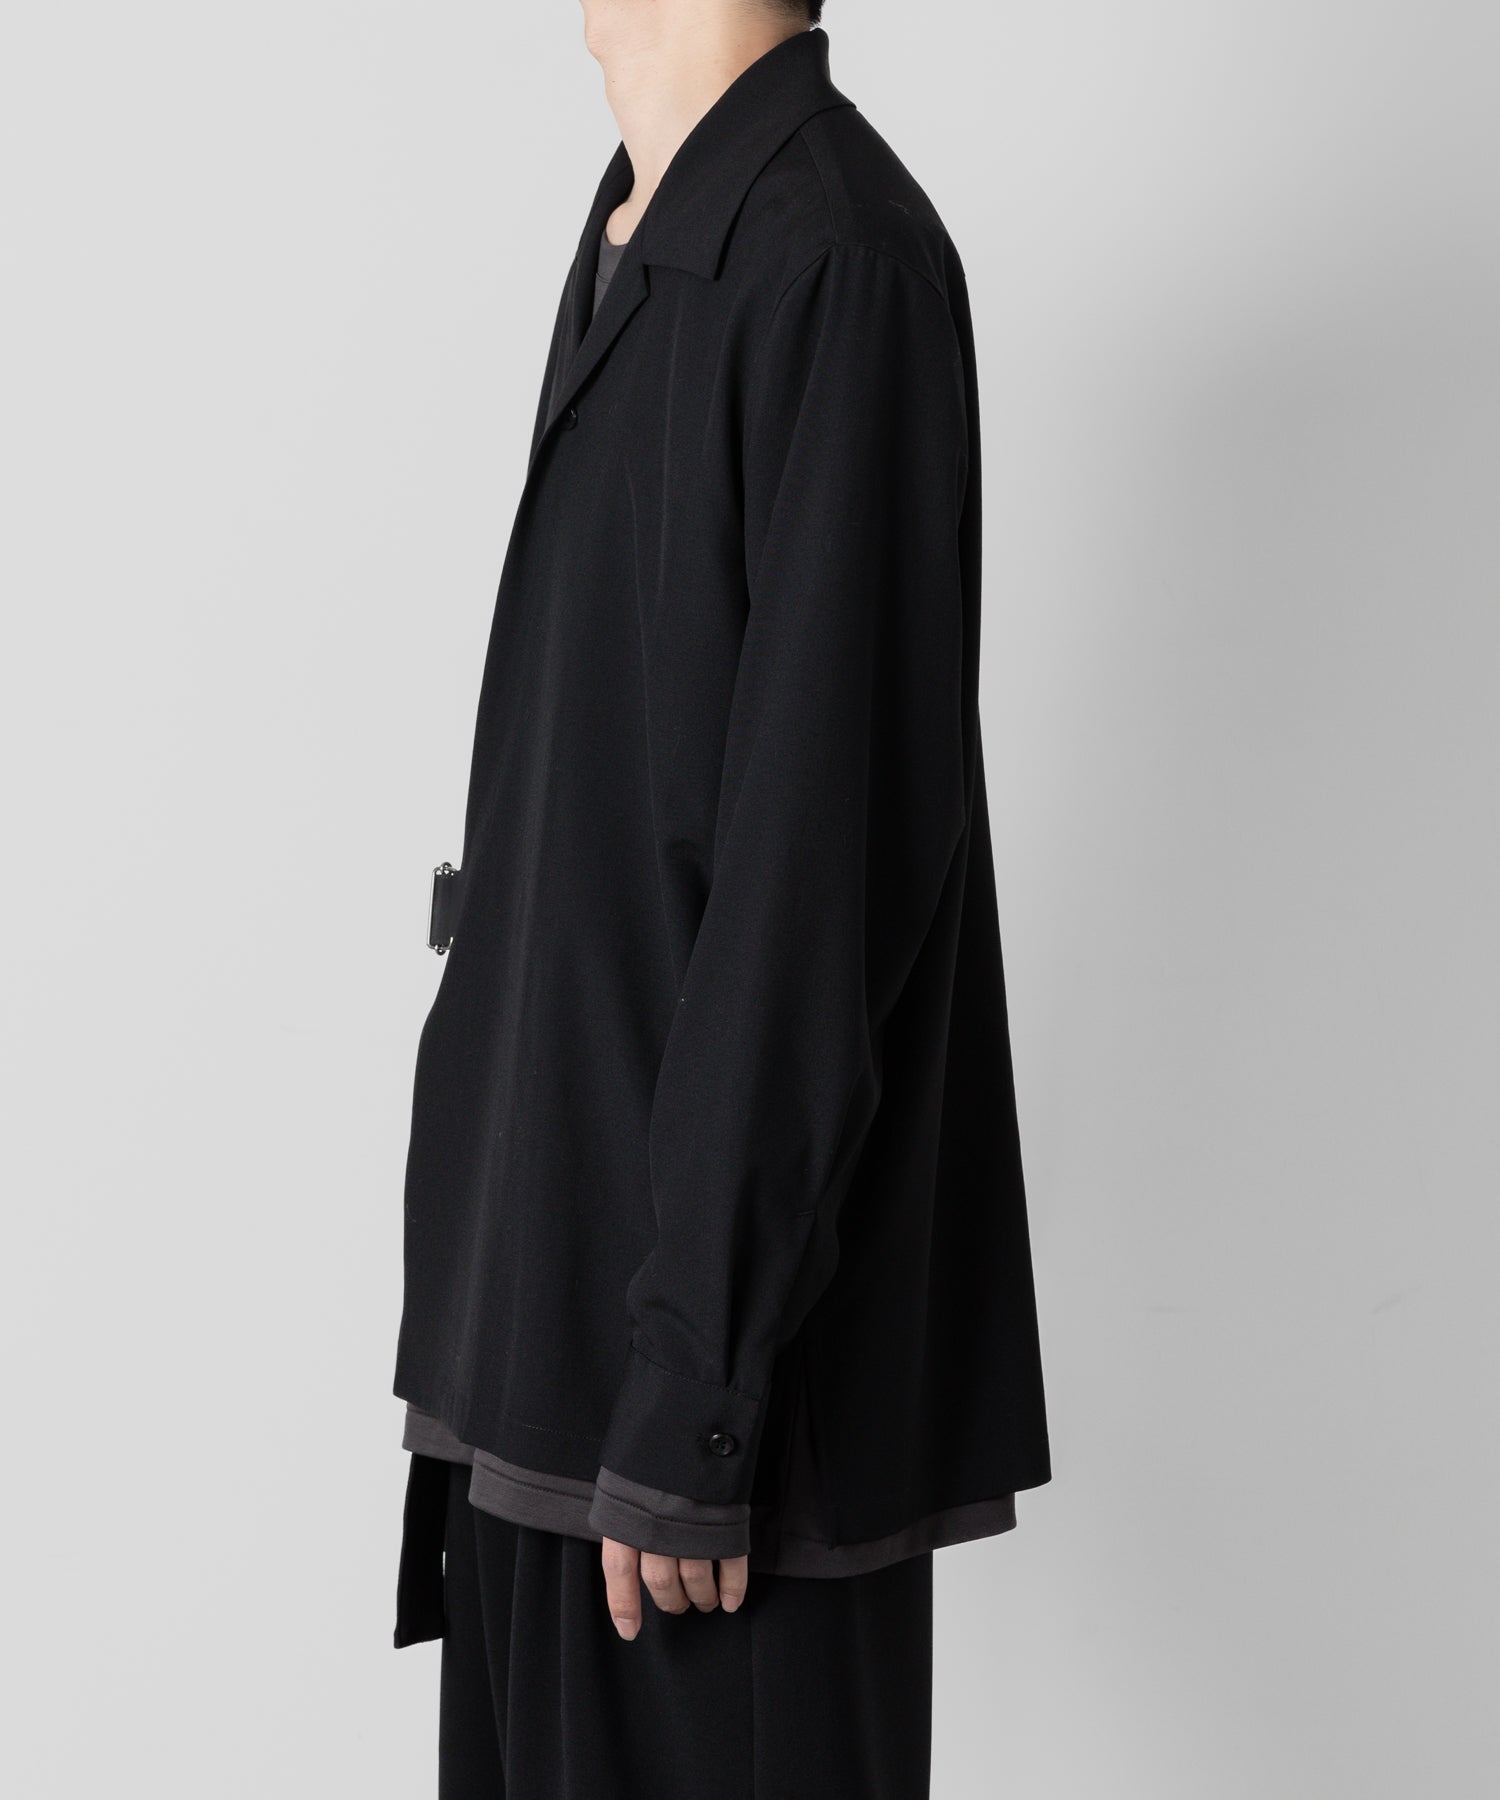 【ATTACHMENT】ATTACHMENT アタッチメントのWO TROPICAL BELTED L/S SHIRT - BLACK 公式通販サイトsession福岡セレクトショップ